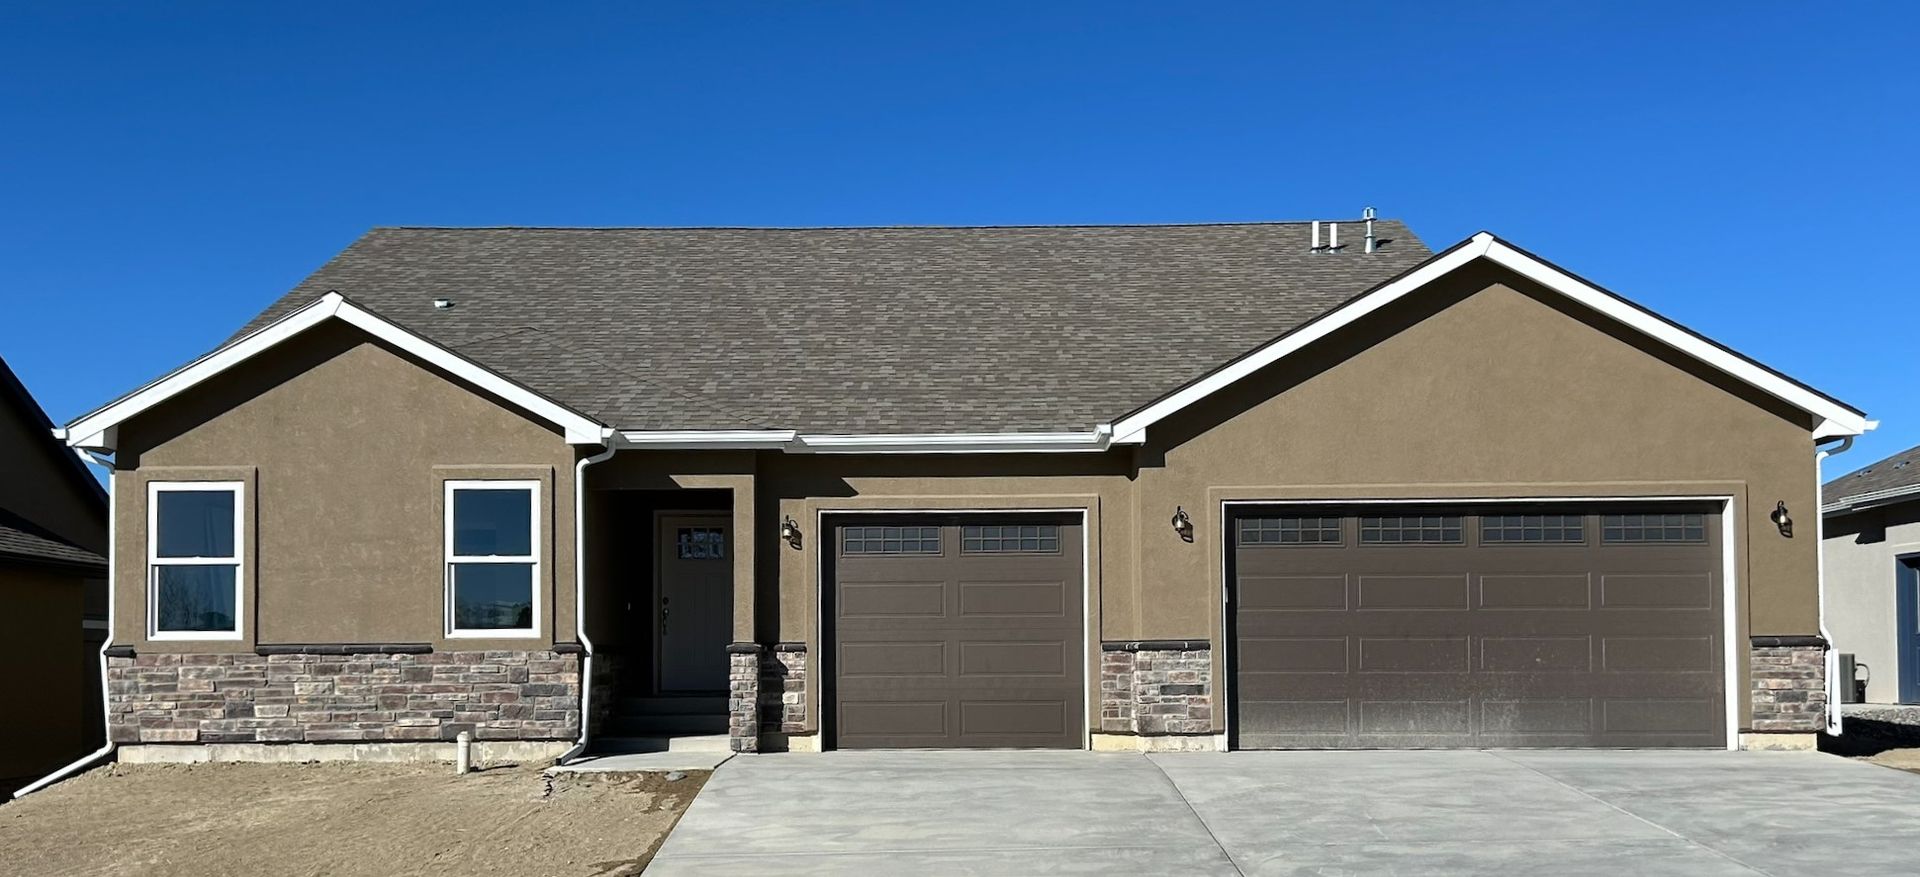 Big Pines craftsman brown stucco and stone front 